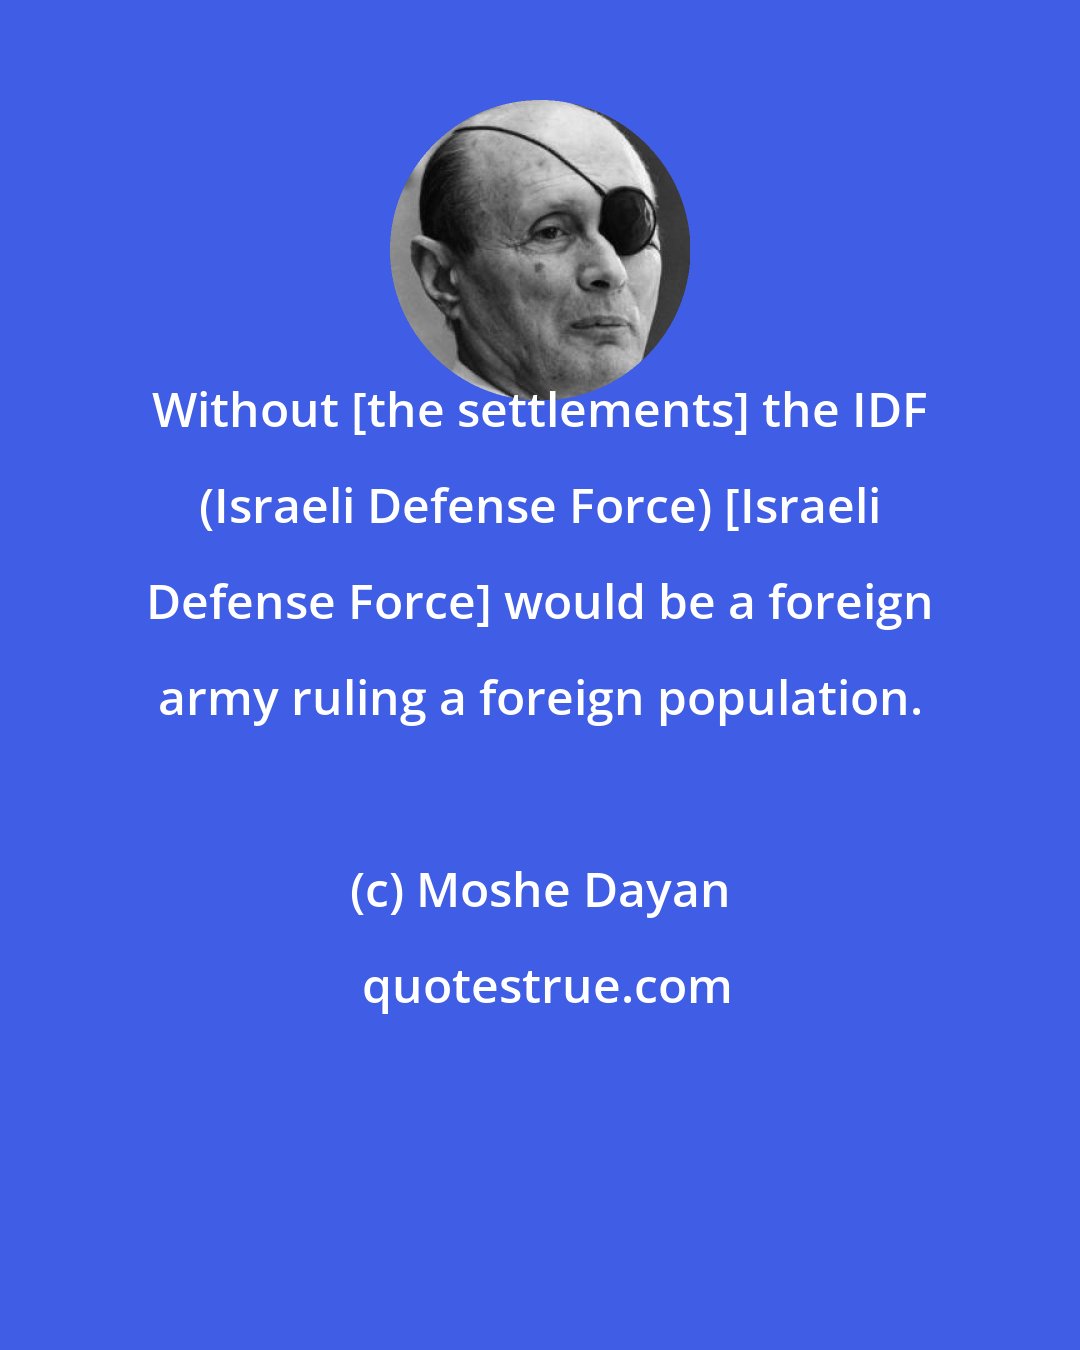 Moshe Dayan: Without [the settlements] the IDF (Israeli Defense Force) [Israeli Defense Force] would be a foreign army ruling a foreign population.